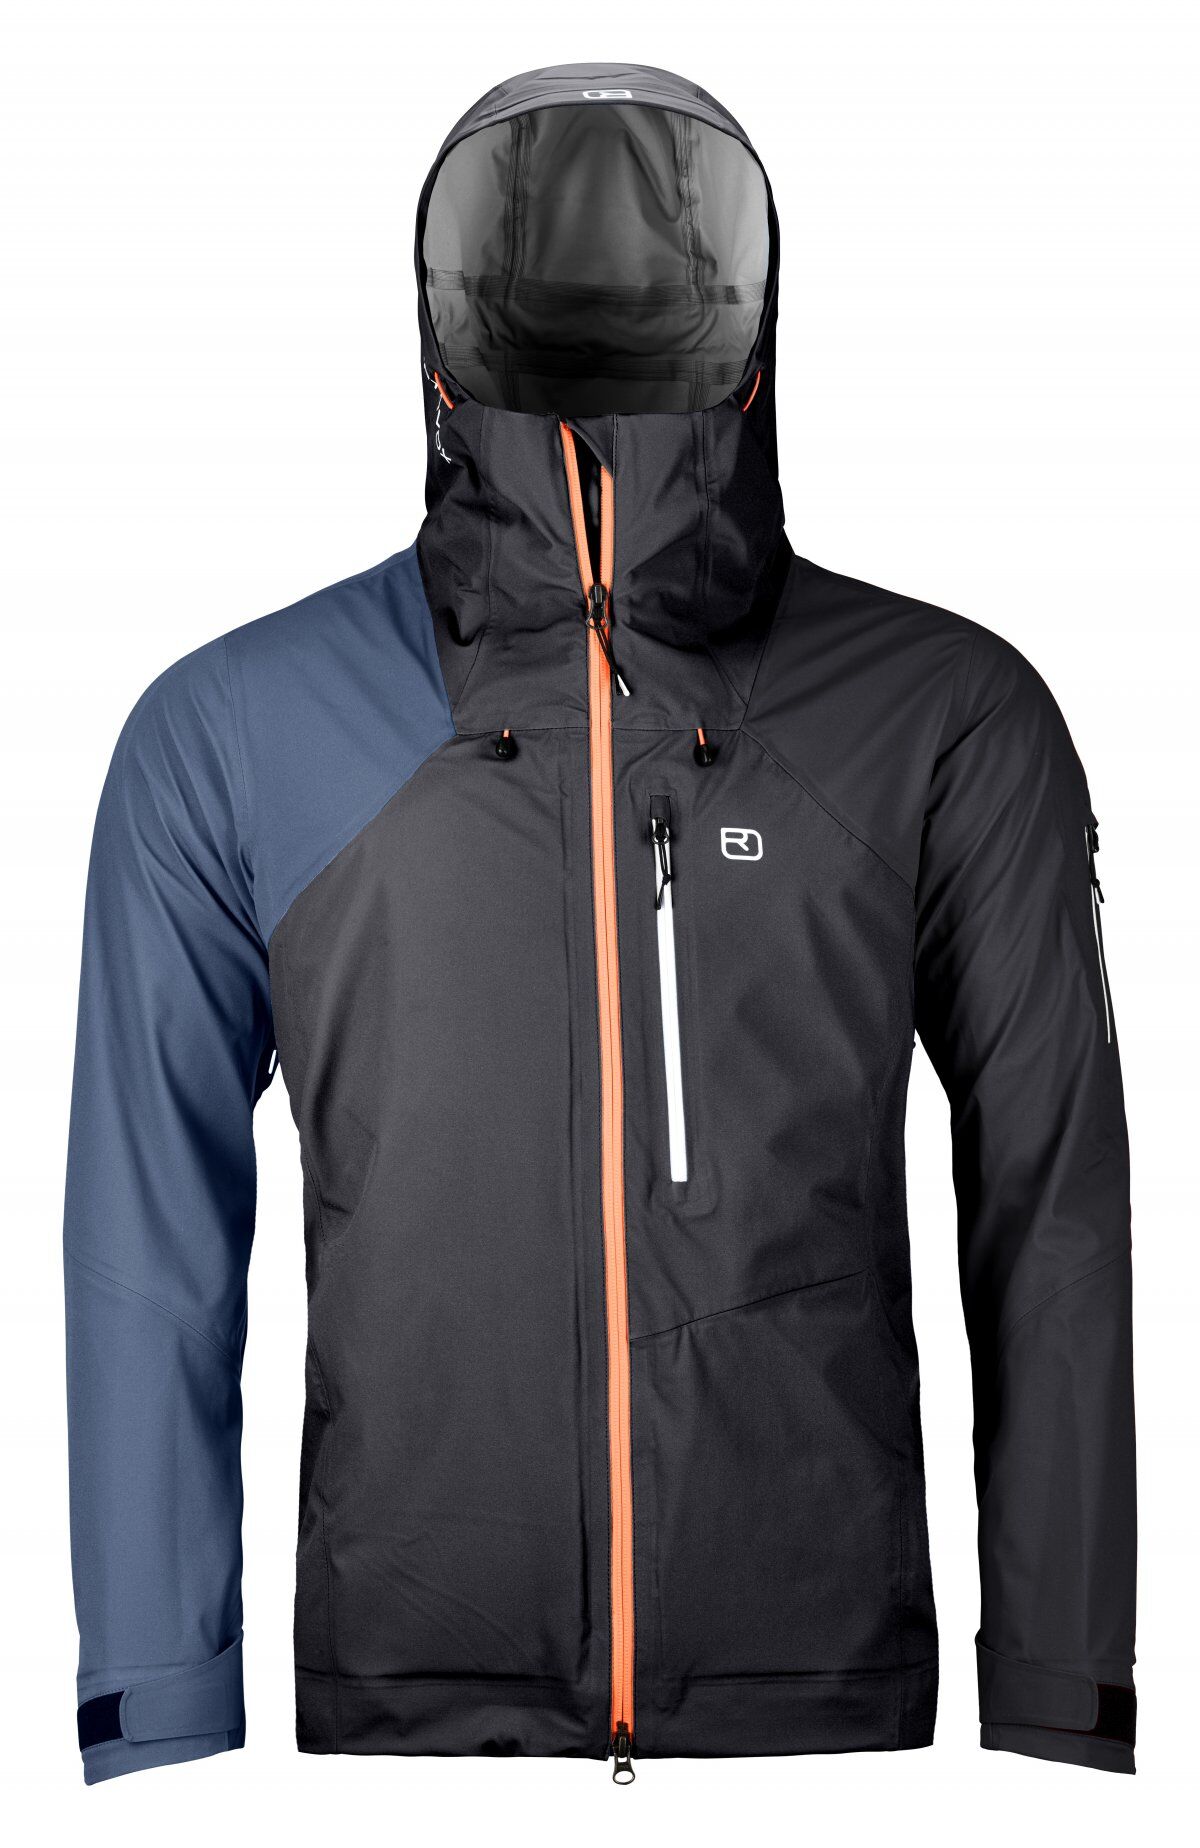 Ortovox - 3L Ortler Jacket - Chaqueta impermeable - Hombre